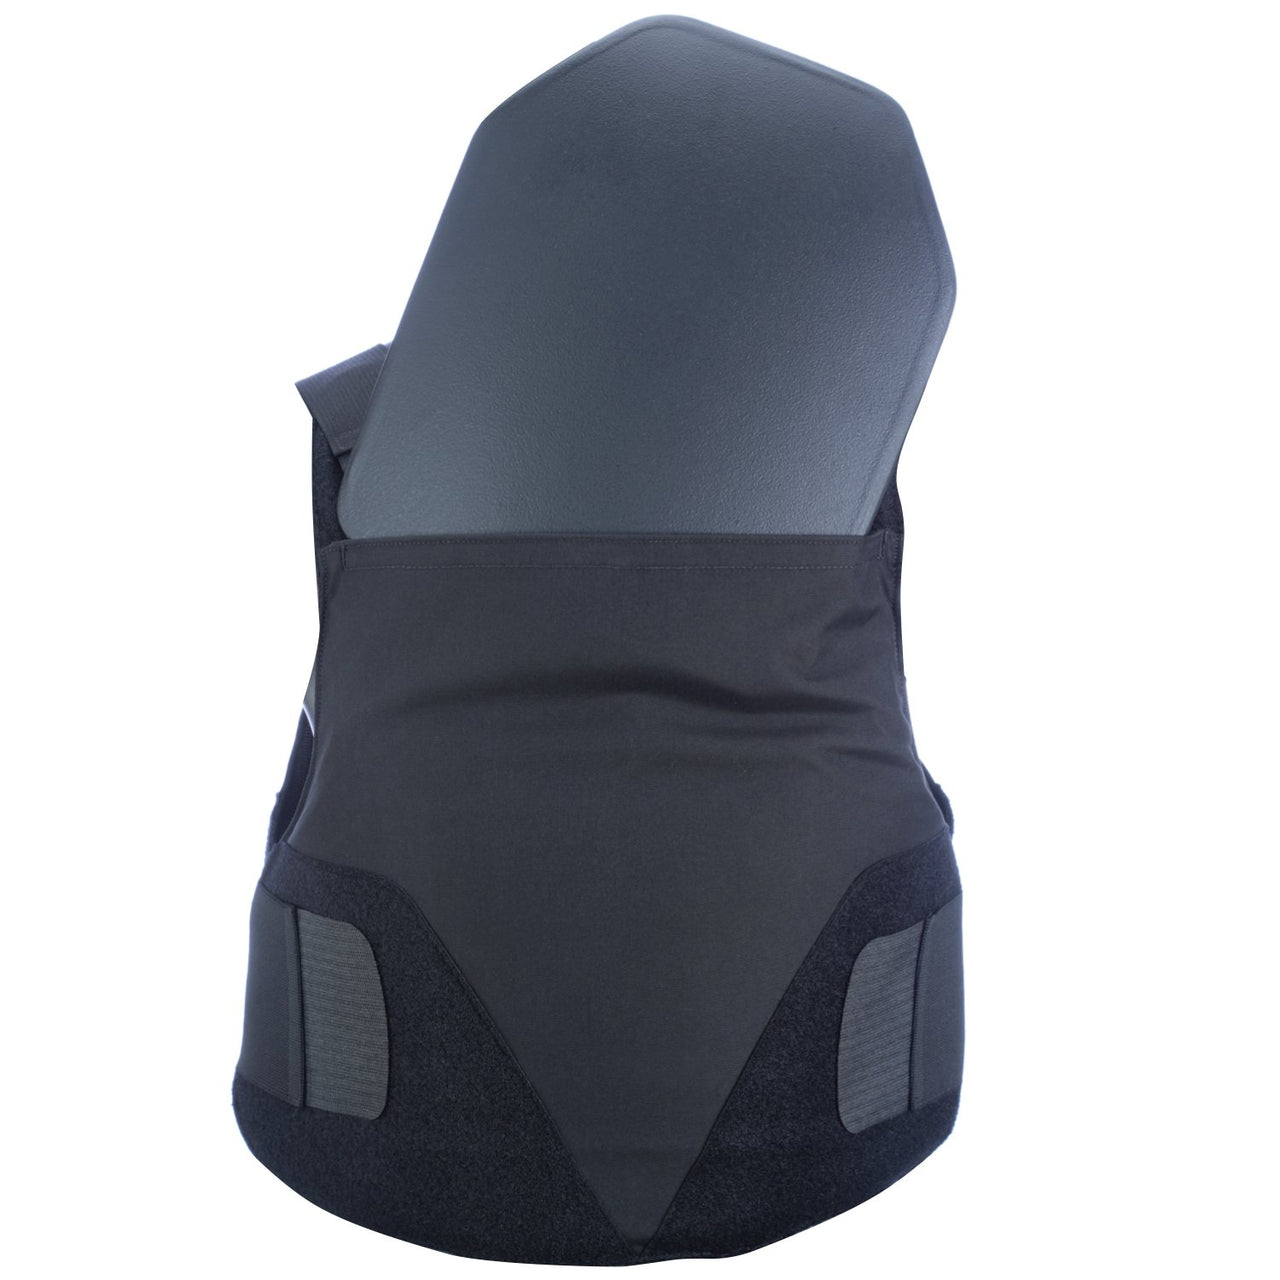 The back view of a Body Armor Direct All American Concealable Enhanced Multi-Threat Vest.